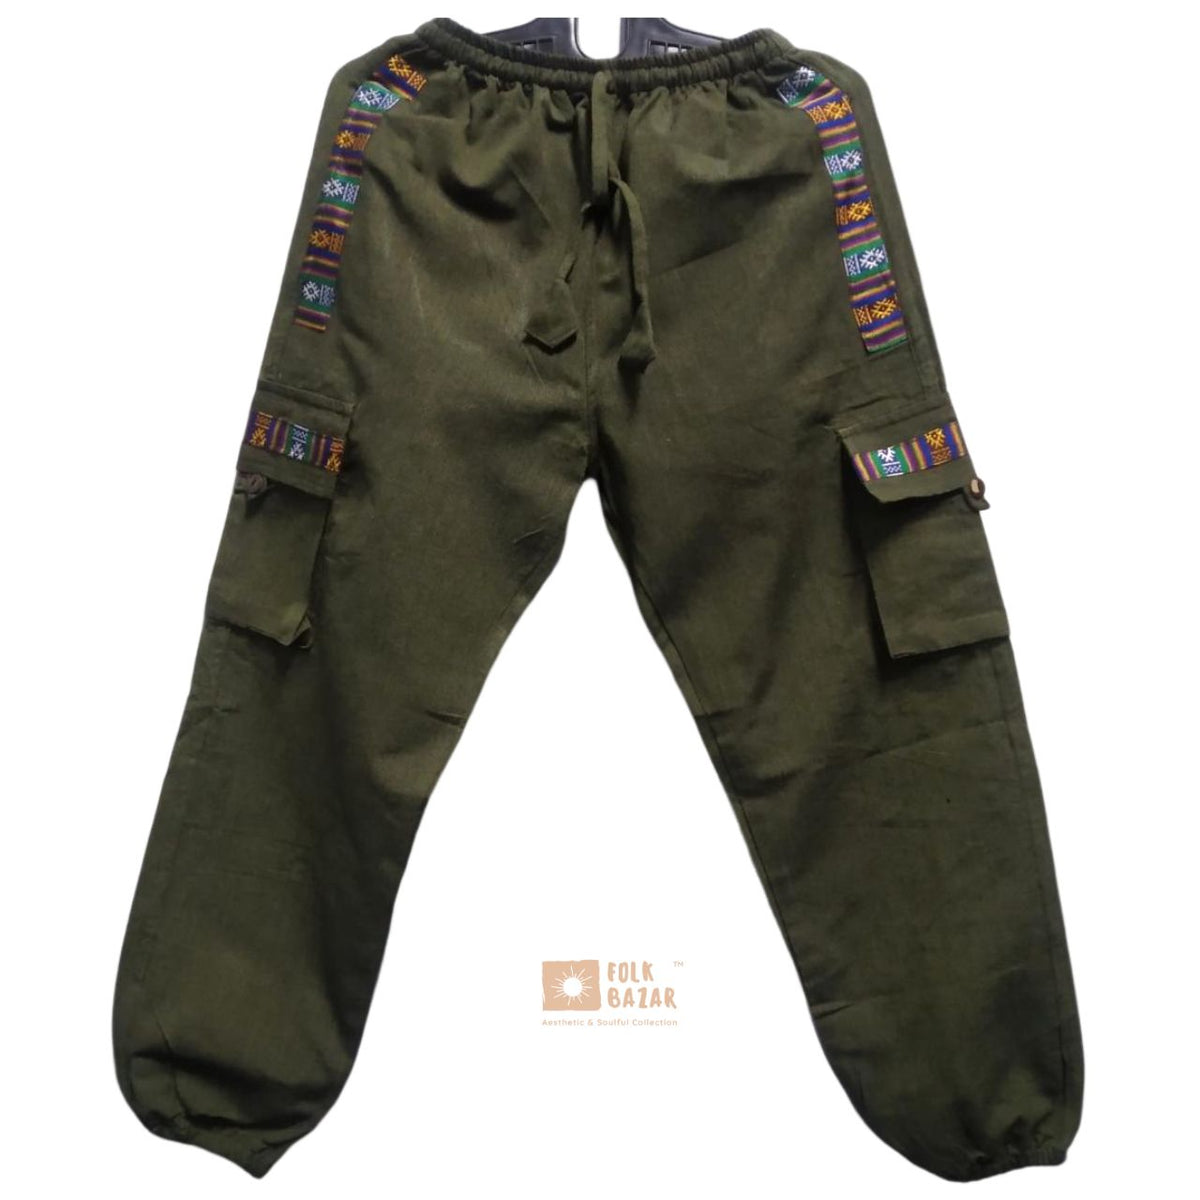 DVGRR Halara Jogger Letter Graphic Slant Pocket Drawstring Waist Sweatpants  (Color : Army Green, Size : XL) : Buy Online at Best Price in KSA - Souq is  now : Fashion